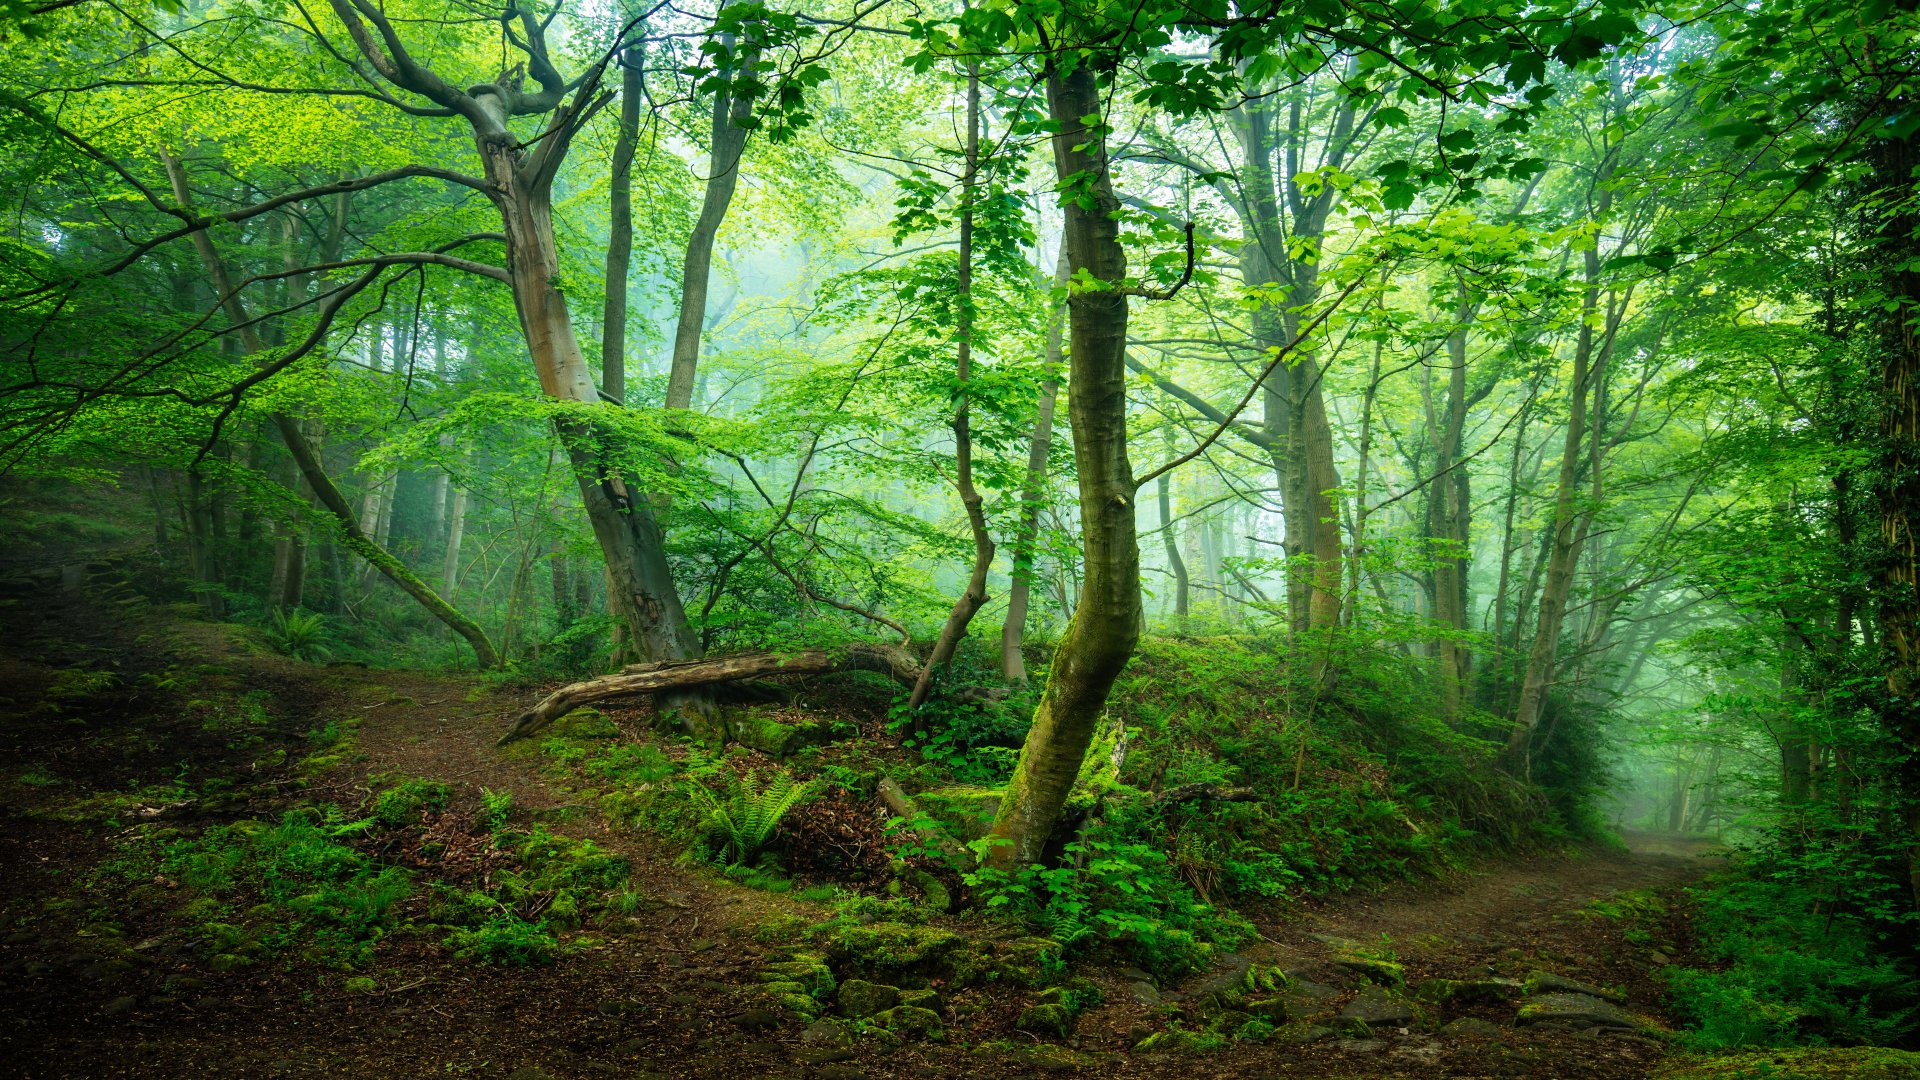 160+ 4K Greenery Wallpapers | Background Images